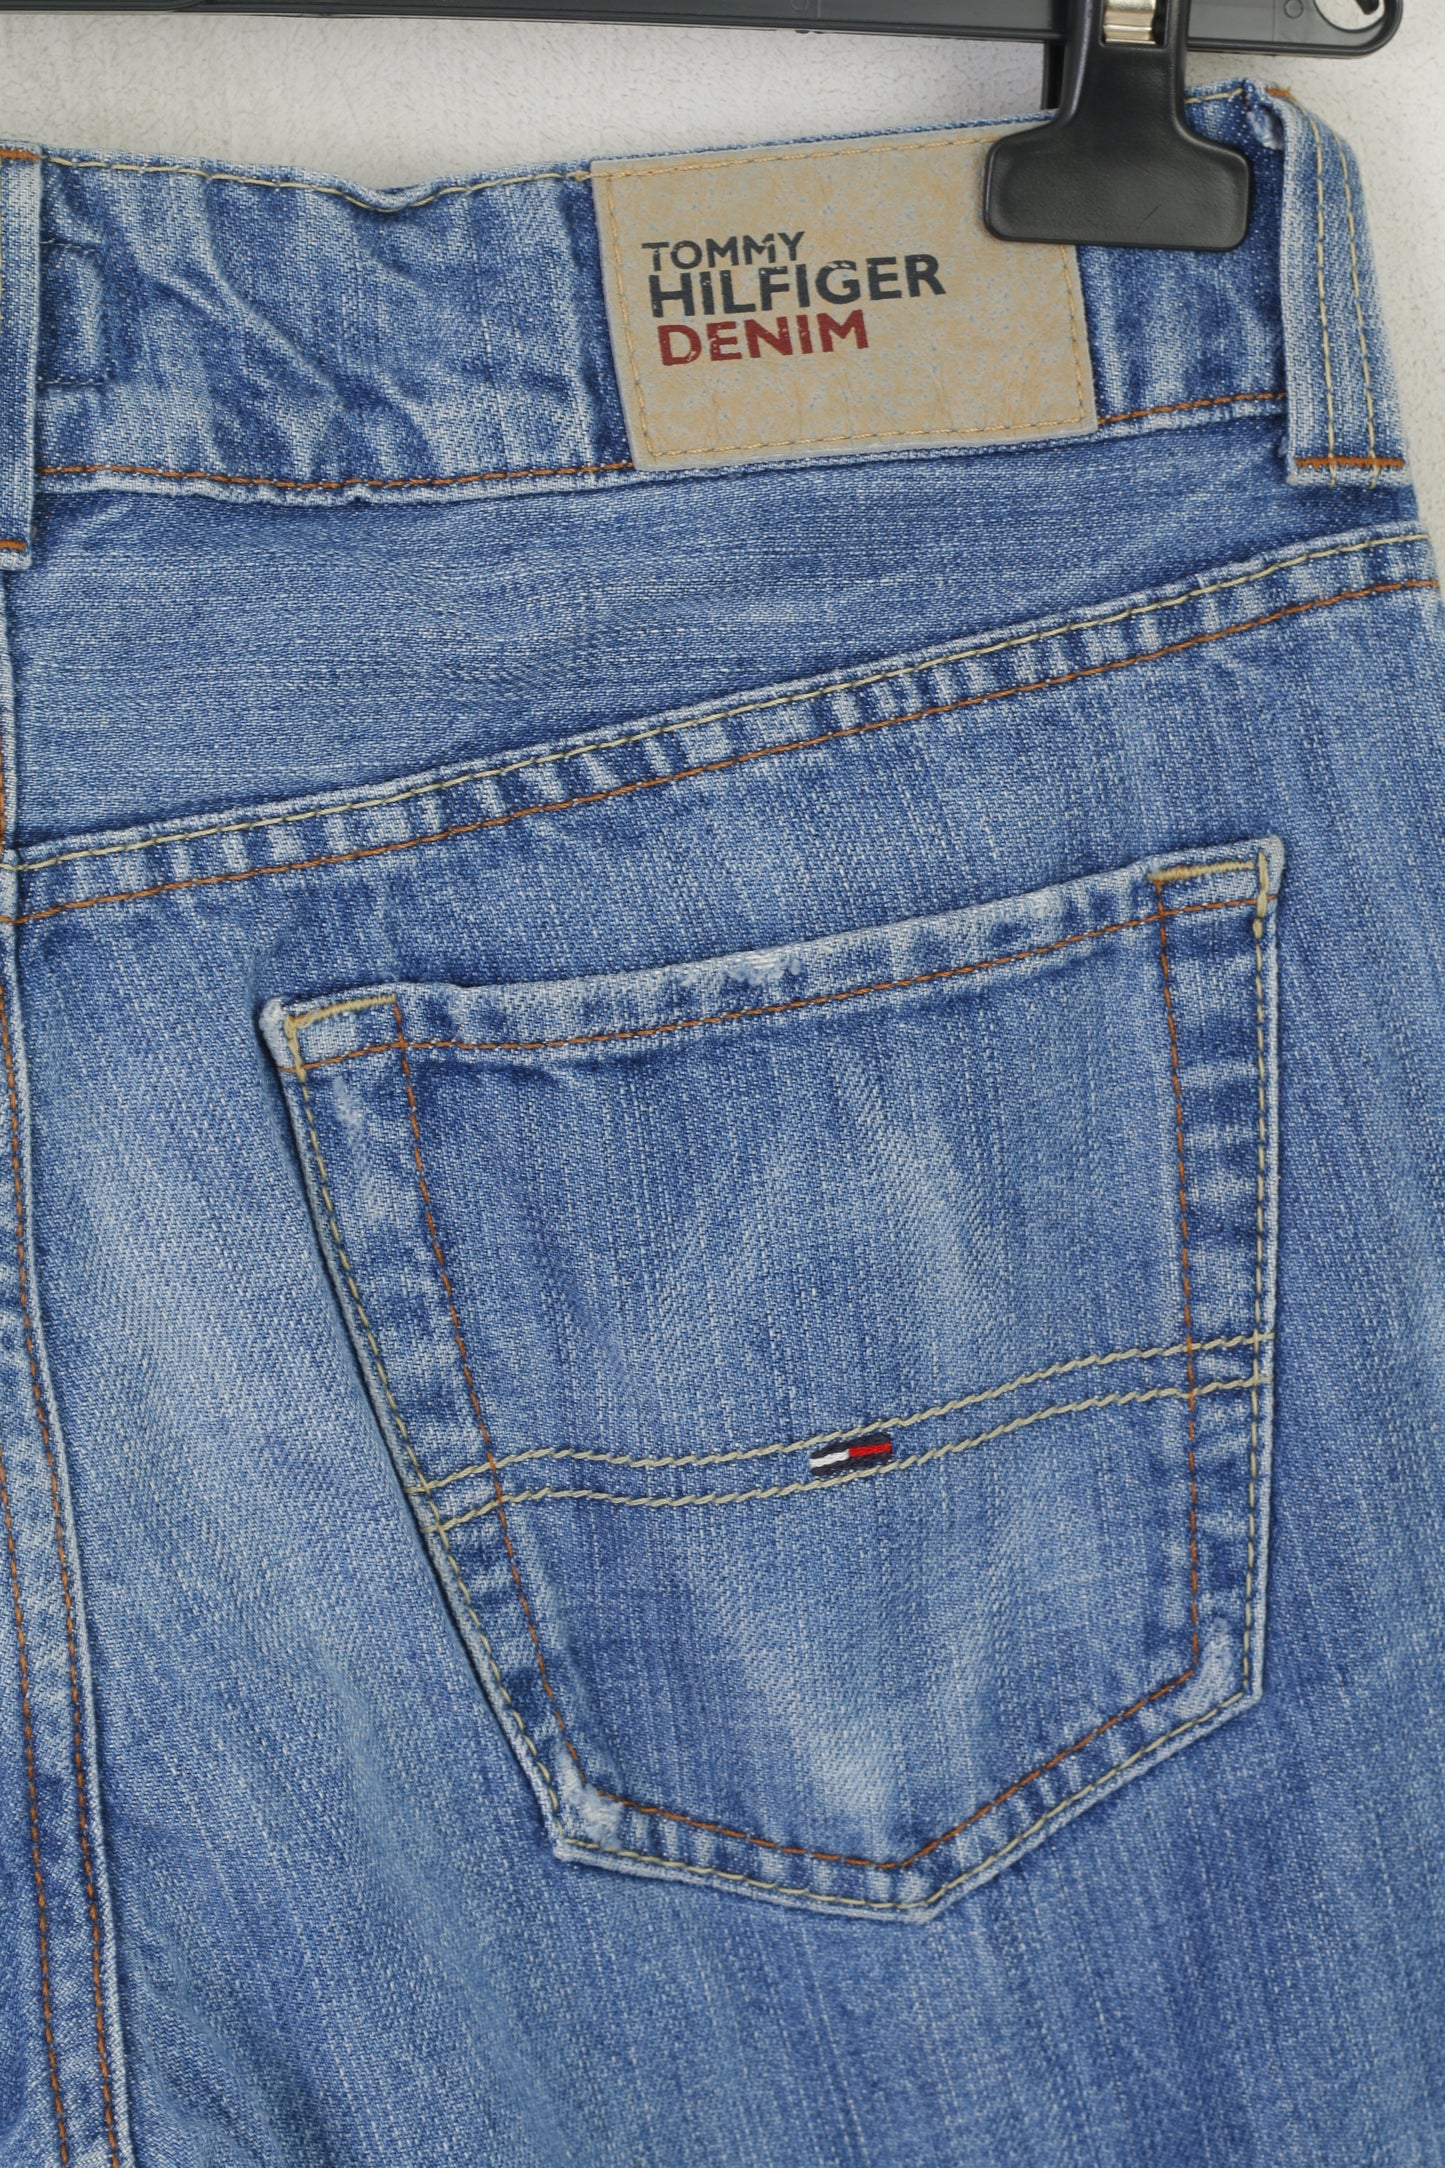 Tommy Hilfiger Women 30 Jeans Trousers Blue Cotton Dash Uncrafted Worn Pants